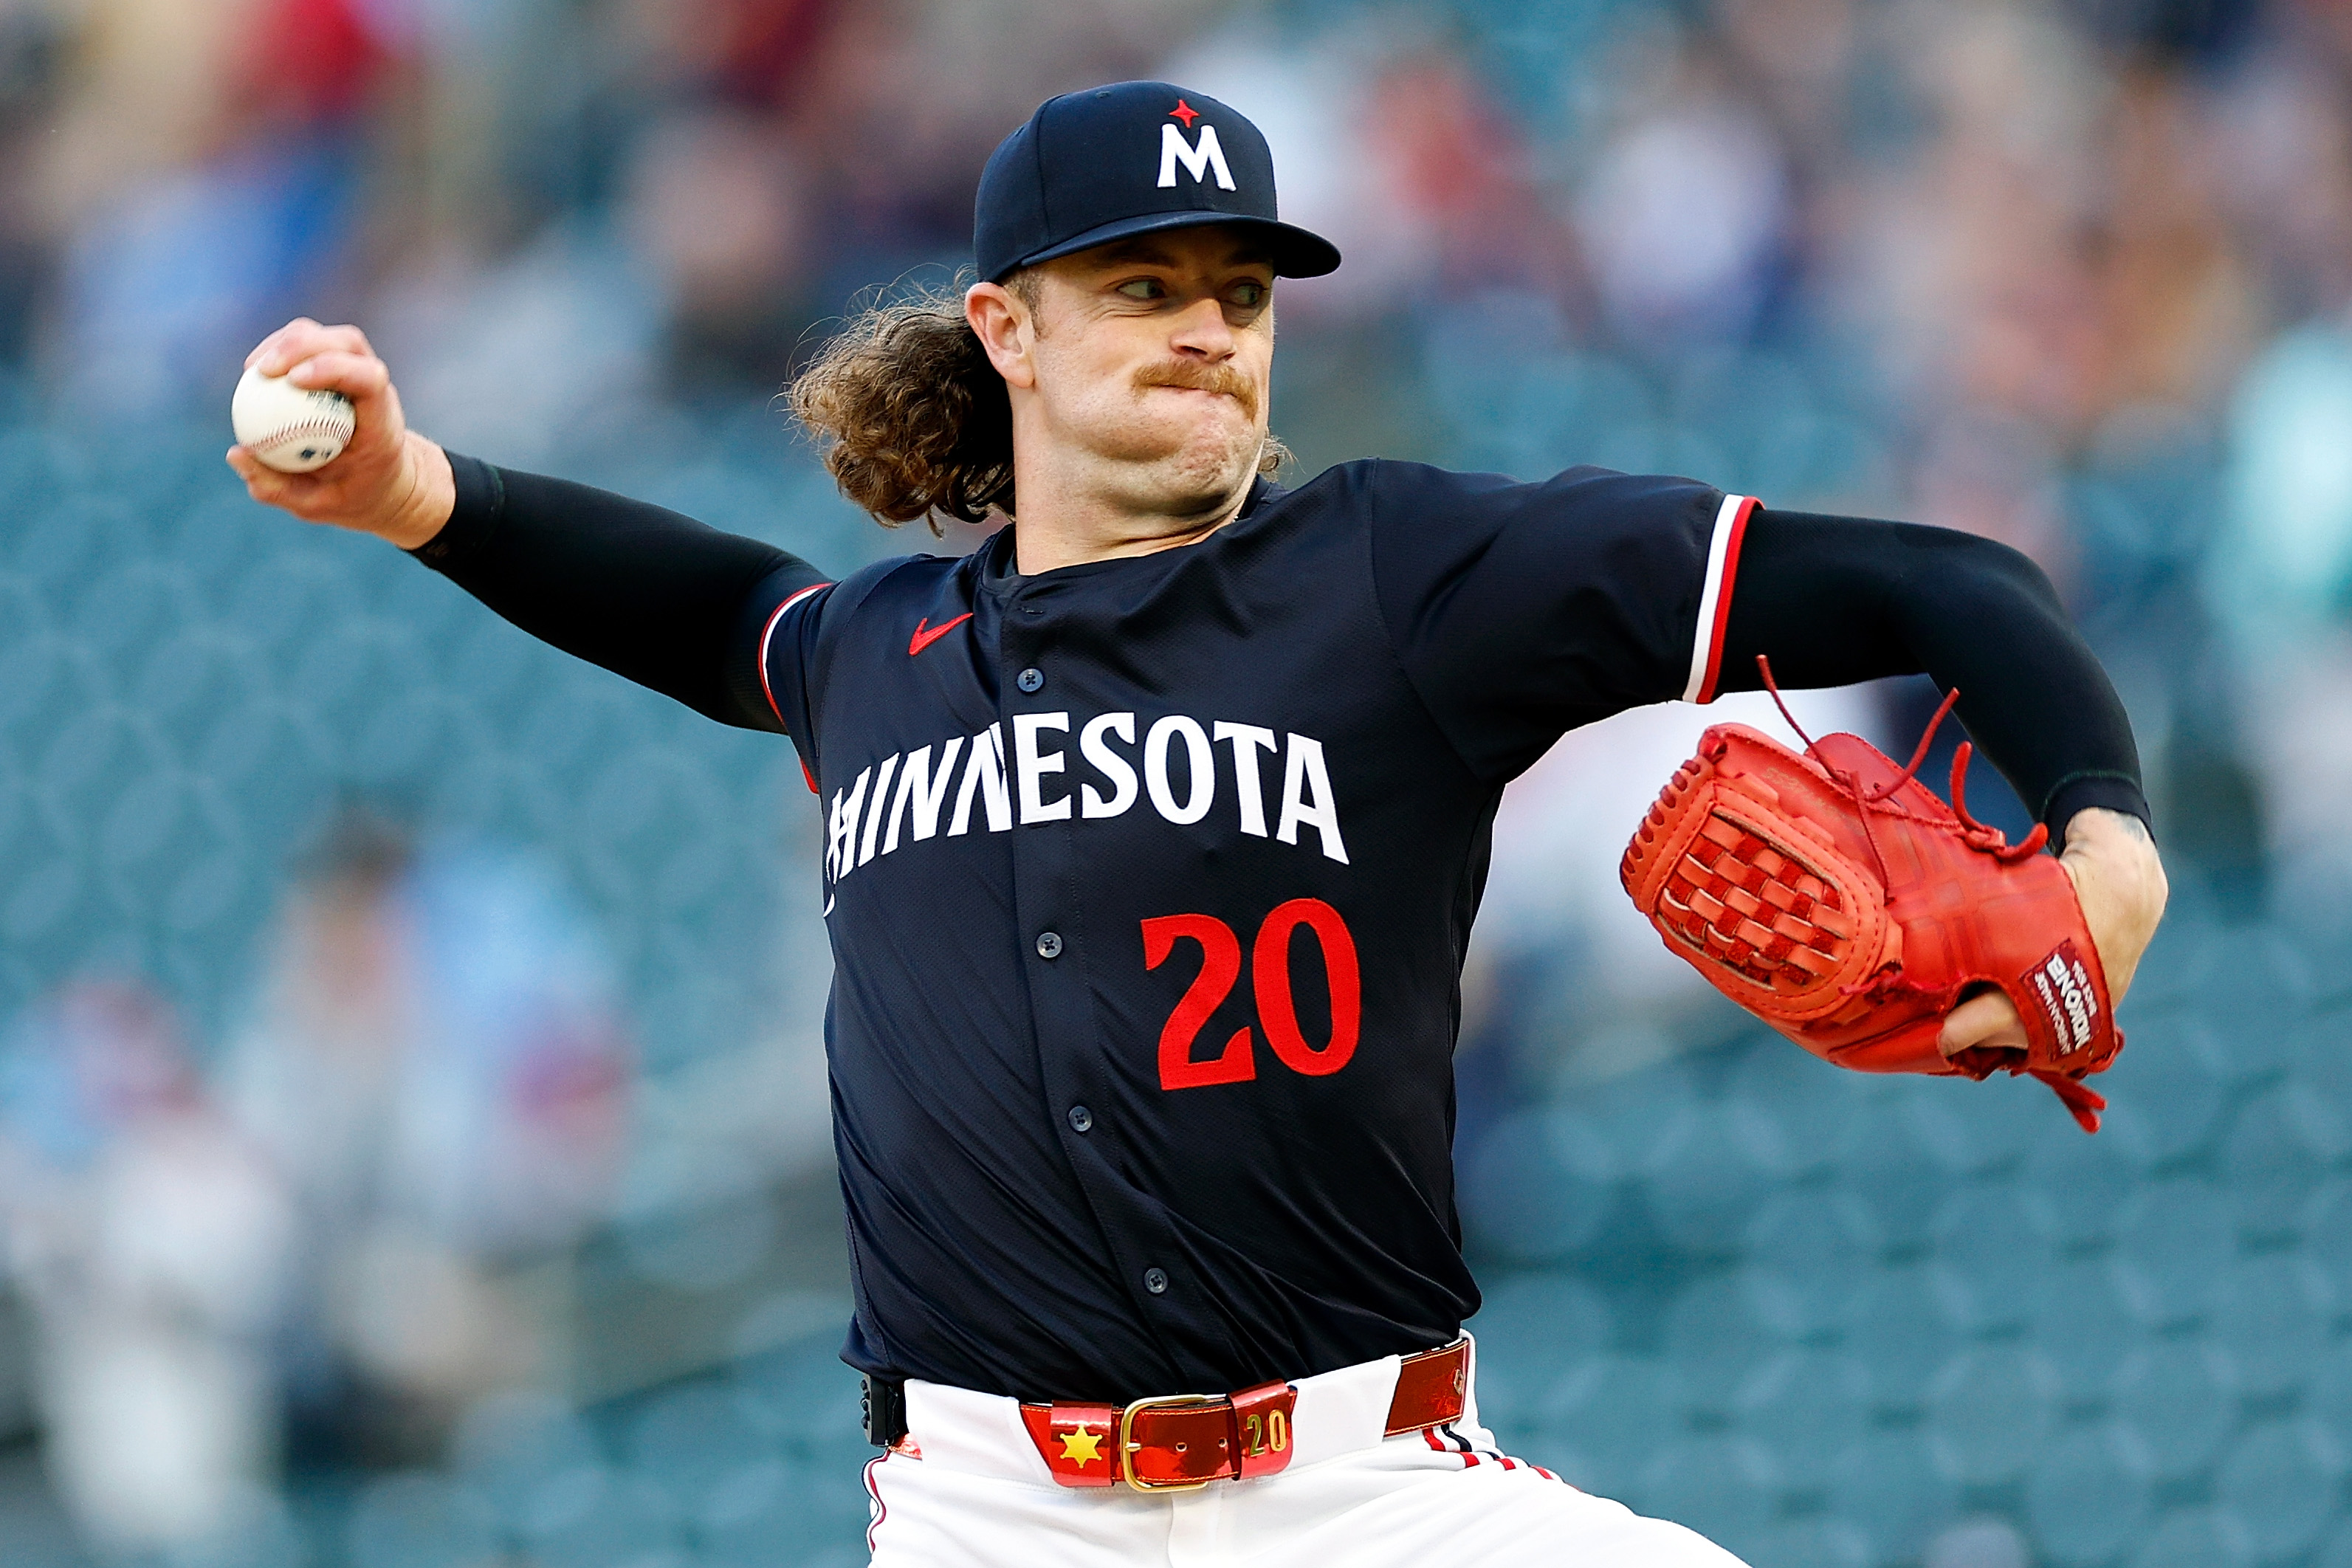 Paddack strikes outs 10 as the Twins shut out the White Sox